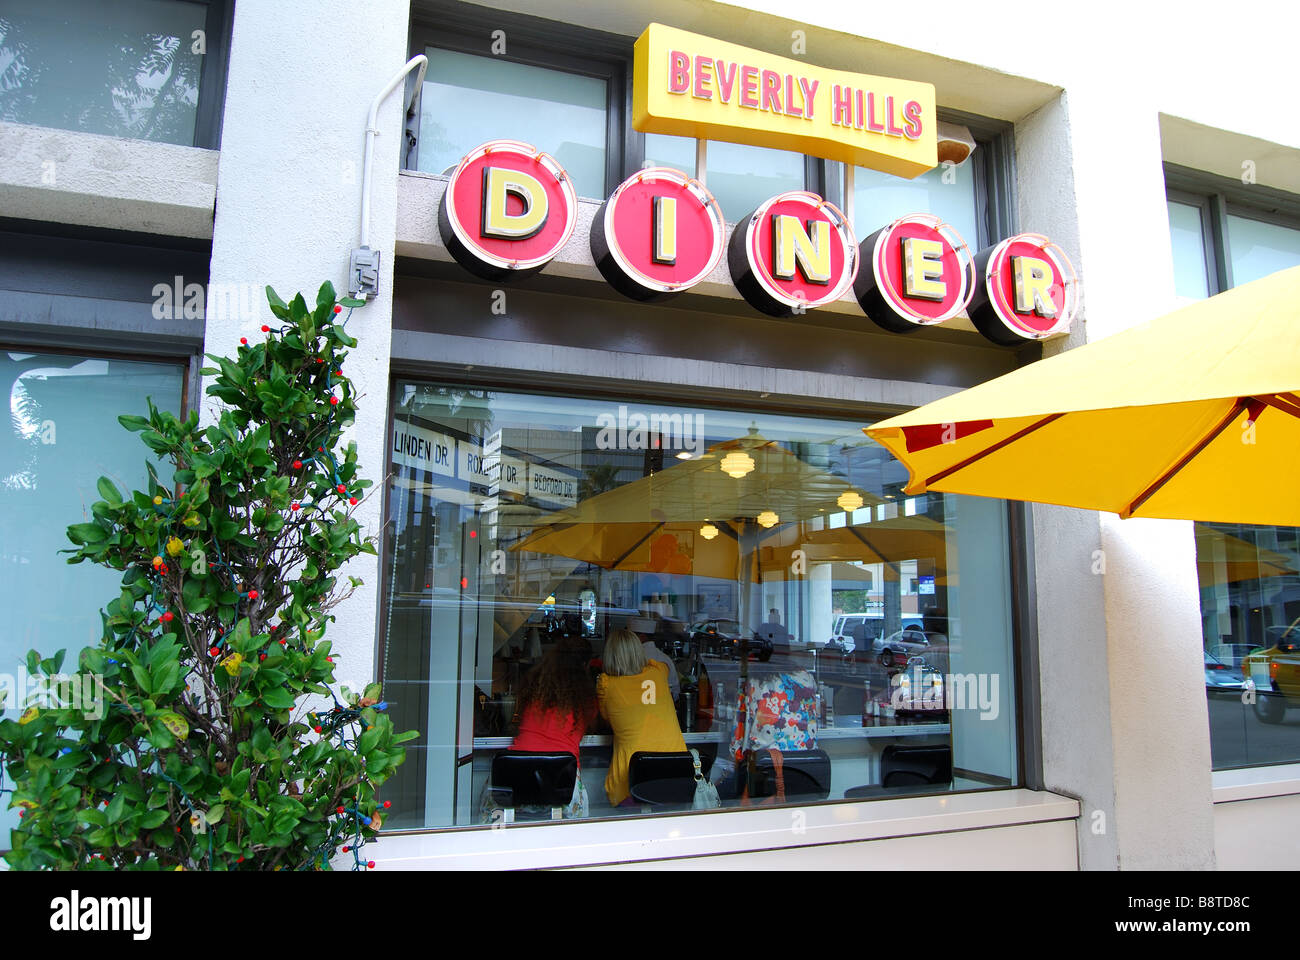 Beverly Hills Diner, North Beverly Drive Beverly Hills Los Angeles, California, Stati Uniti d'America Foto Stock